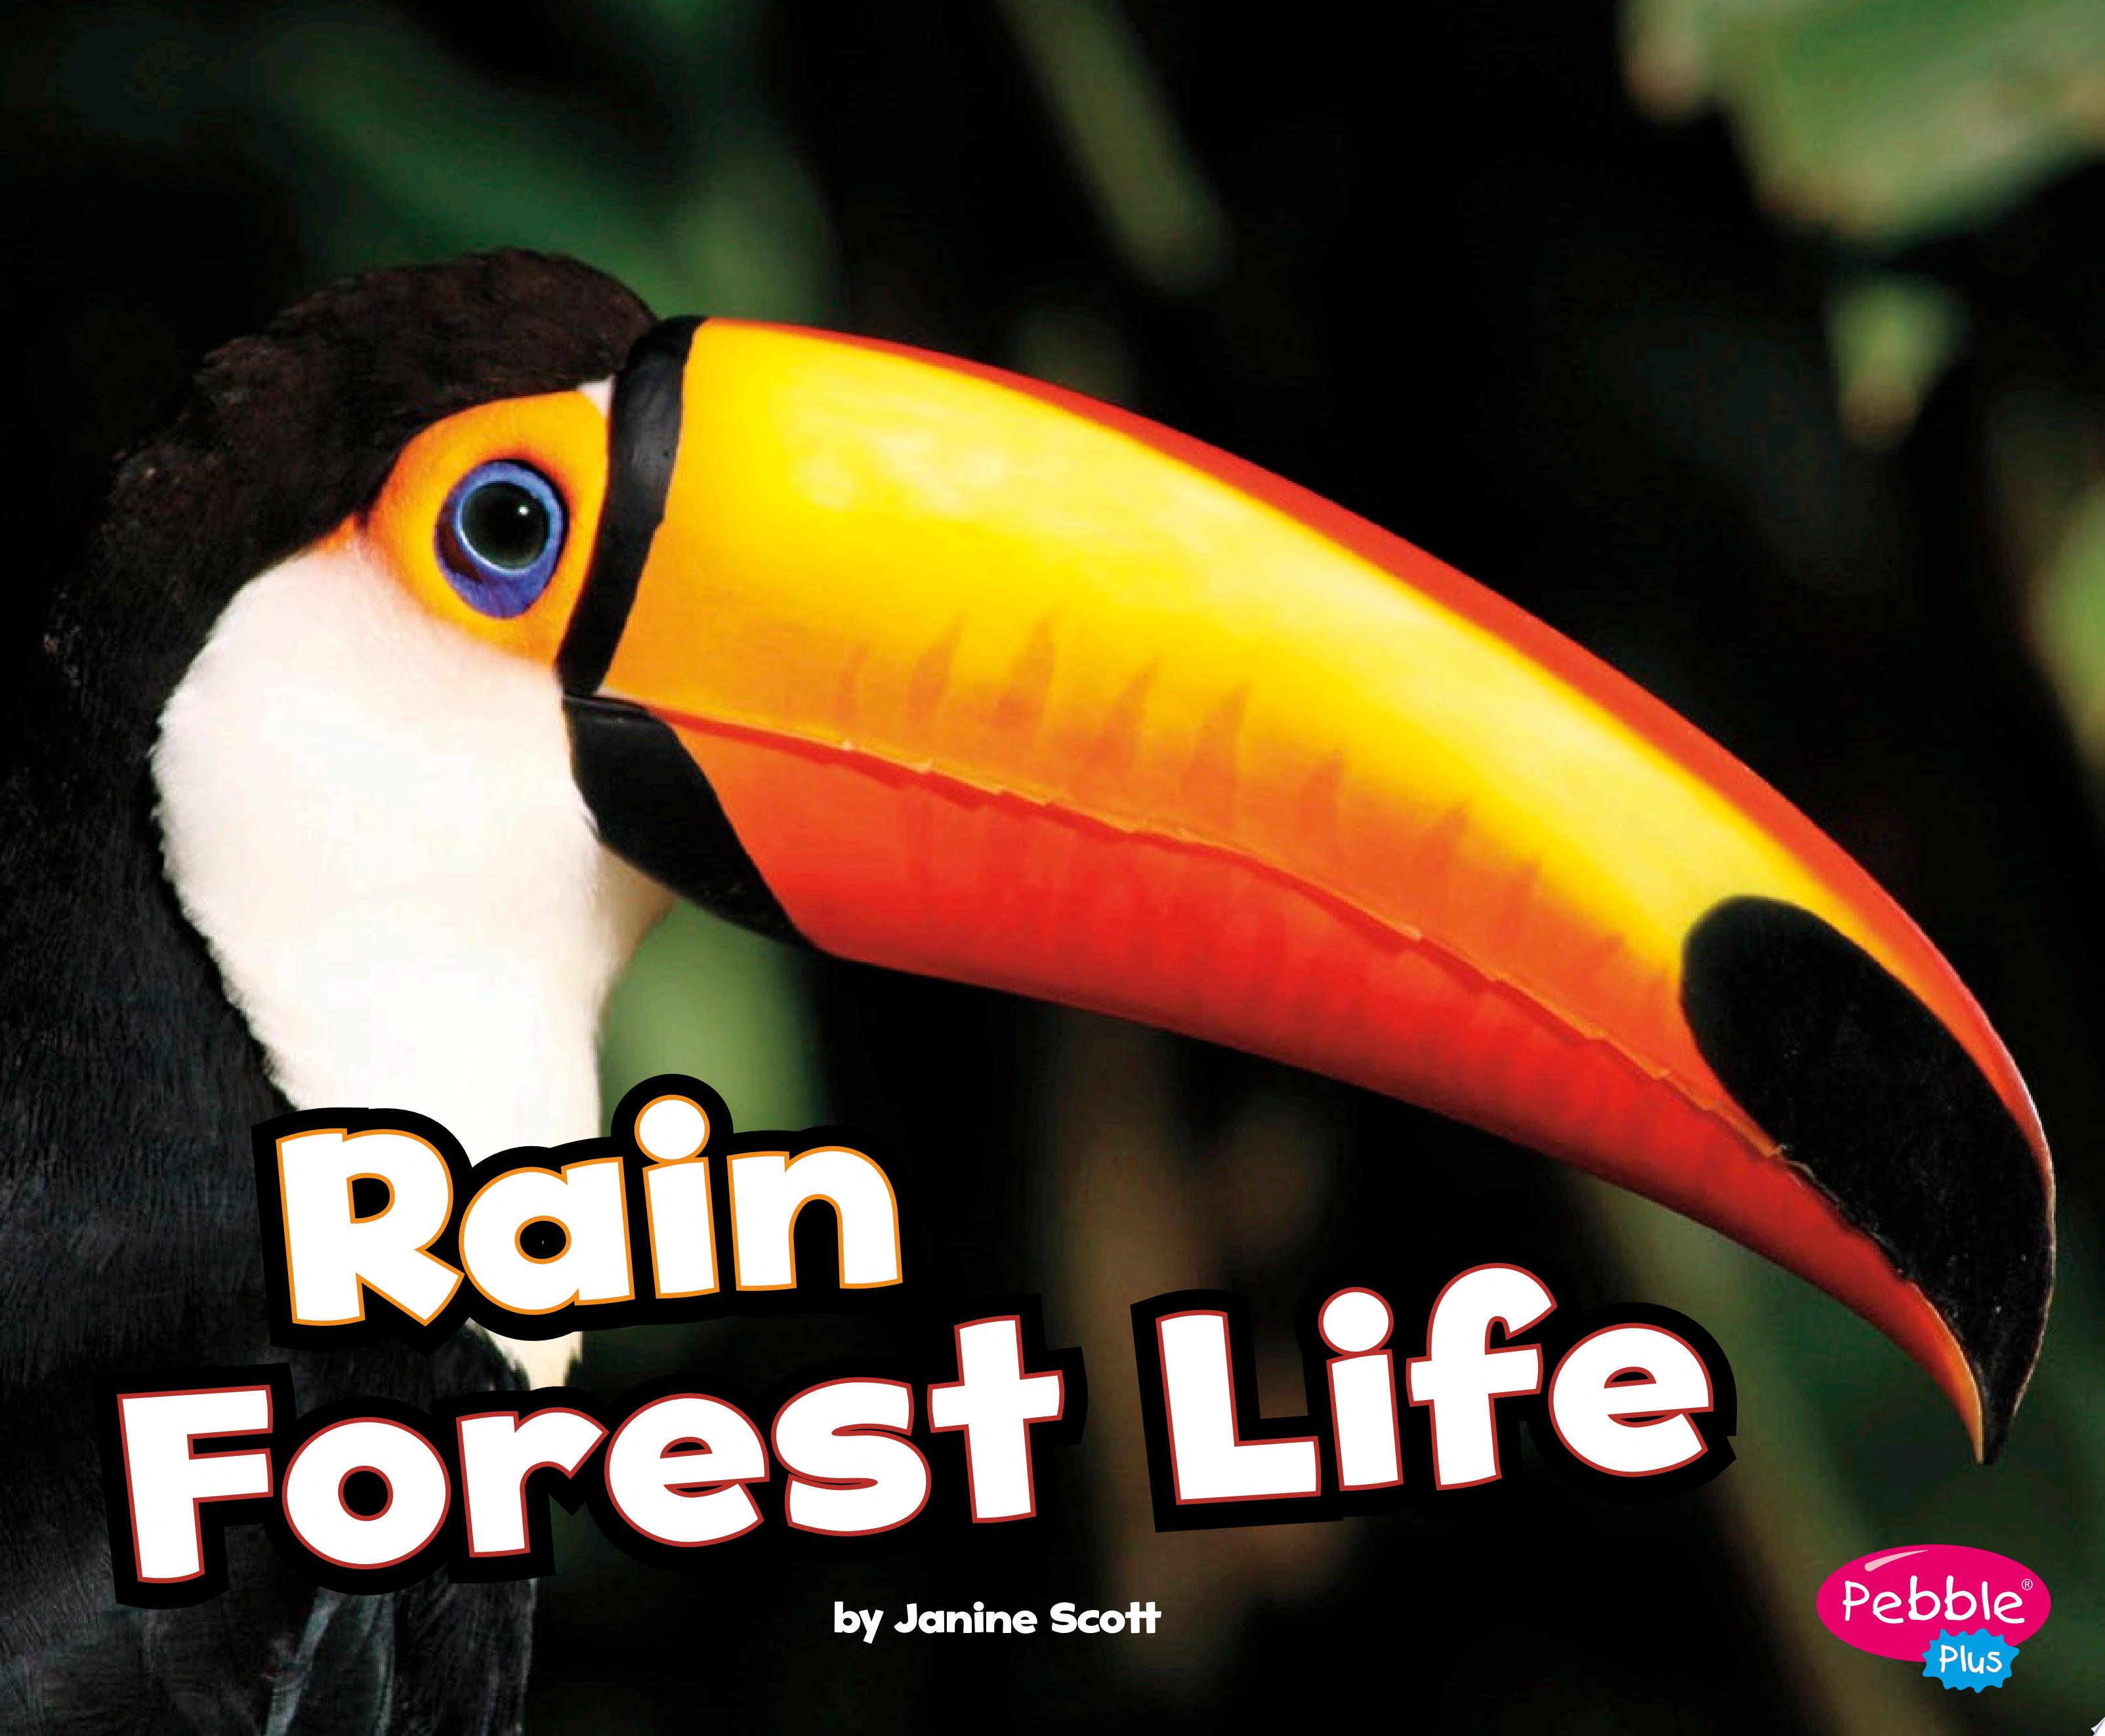 Image for "Rain Forest Life"